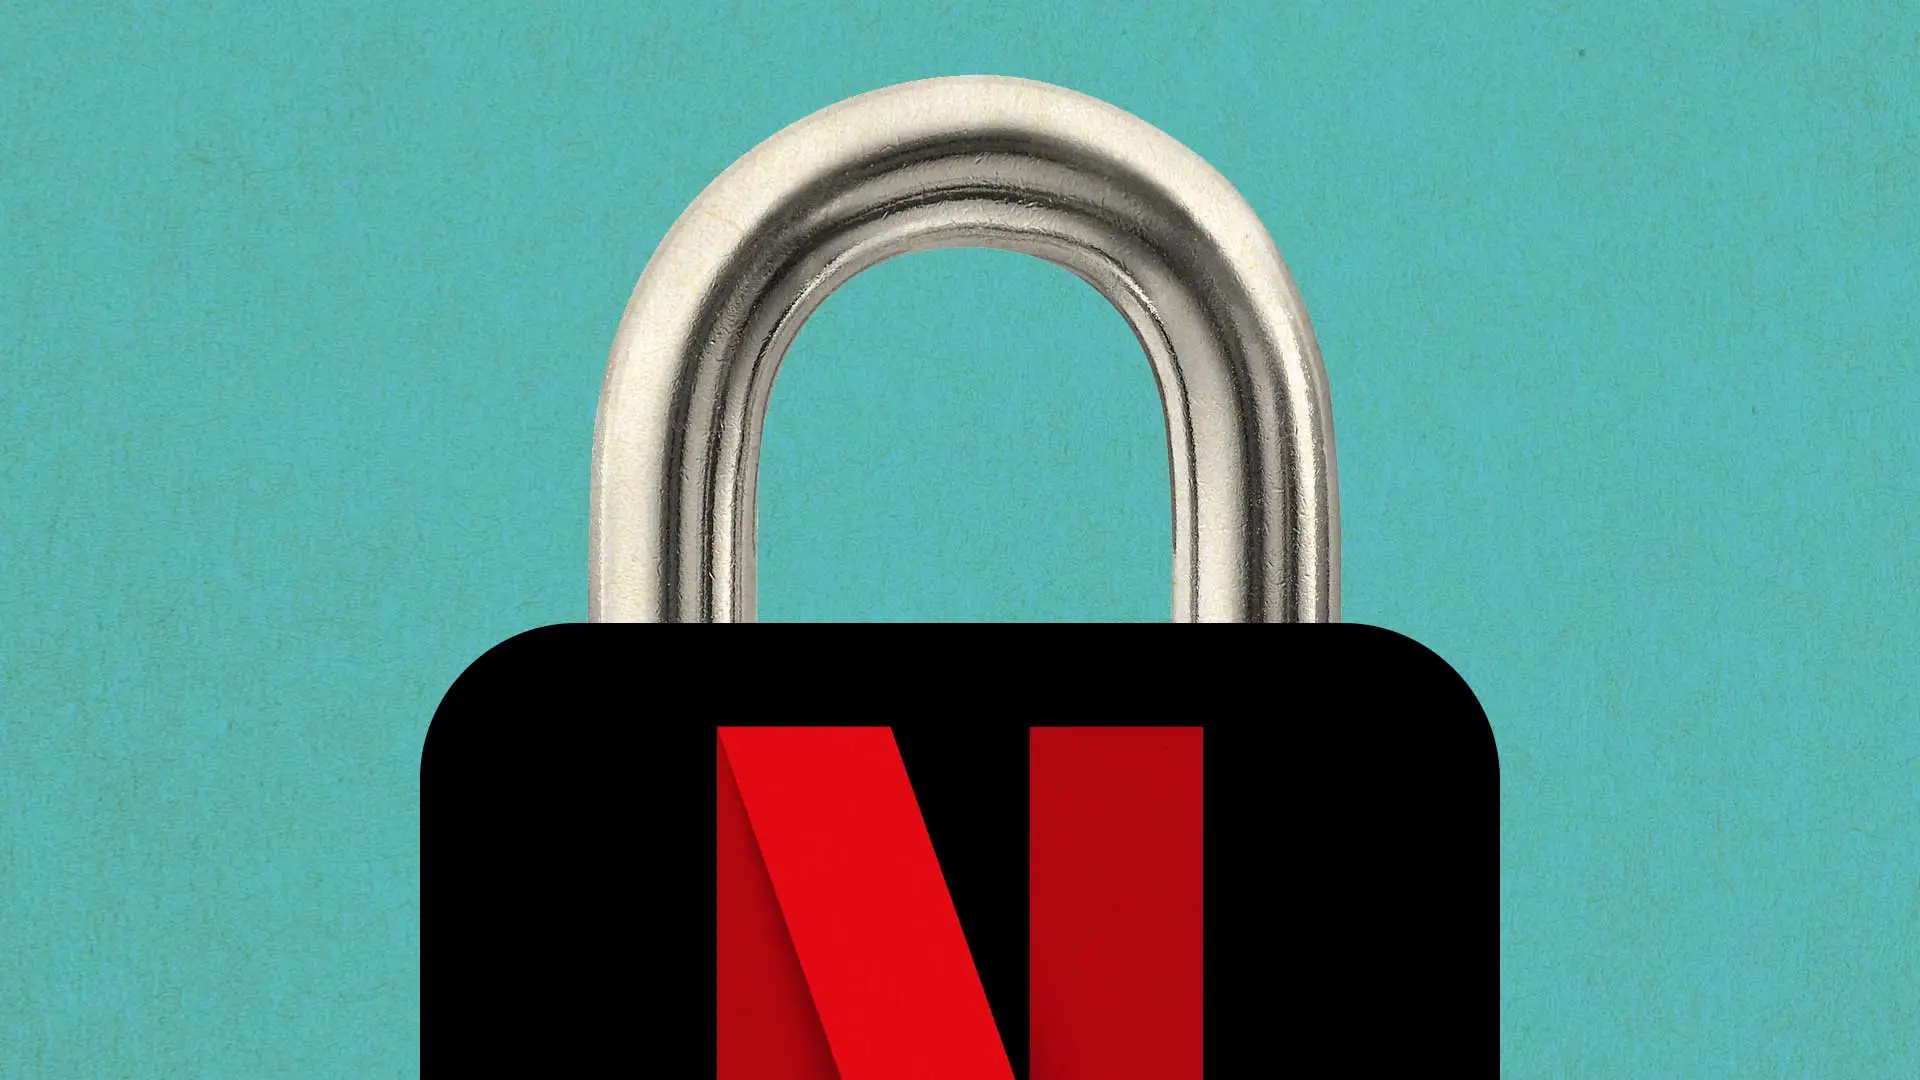 Netflix Ends Apple Pay Support, What Does It Mean for 640 Million Users Worldwide?